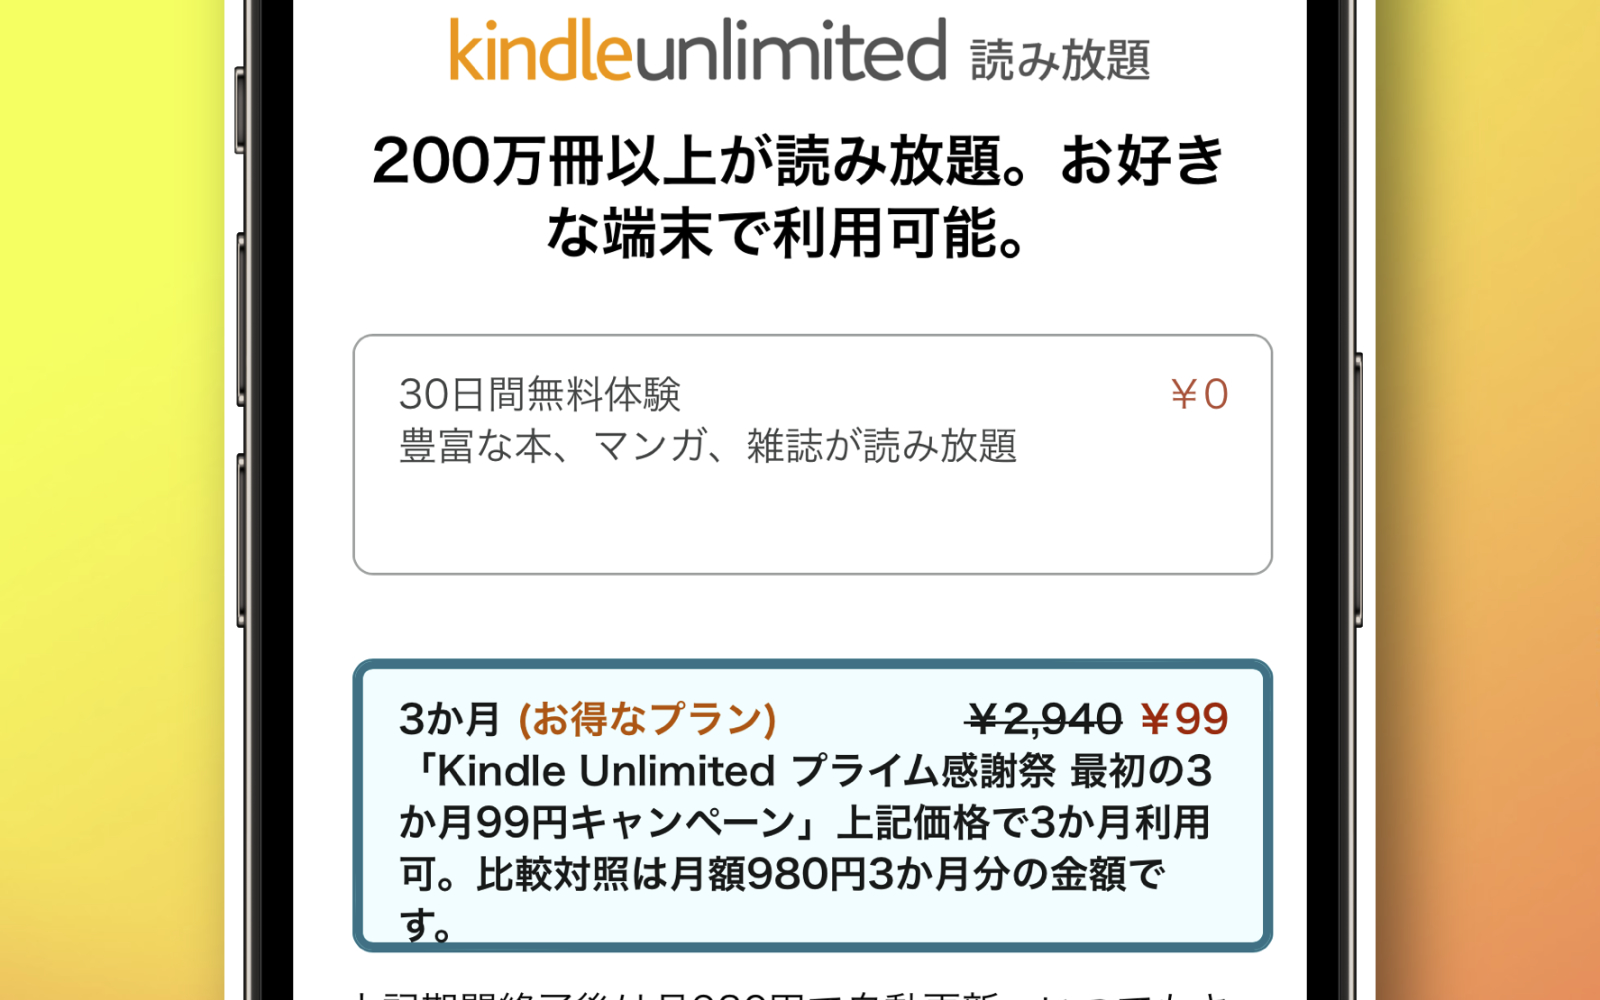 Amazon-Kindle-Unlimited-3month-free-plan.jpg